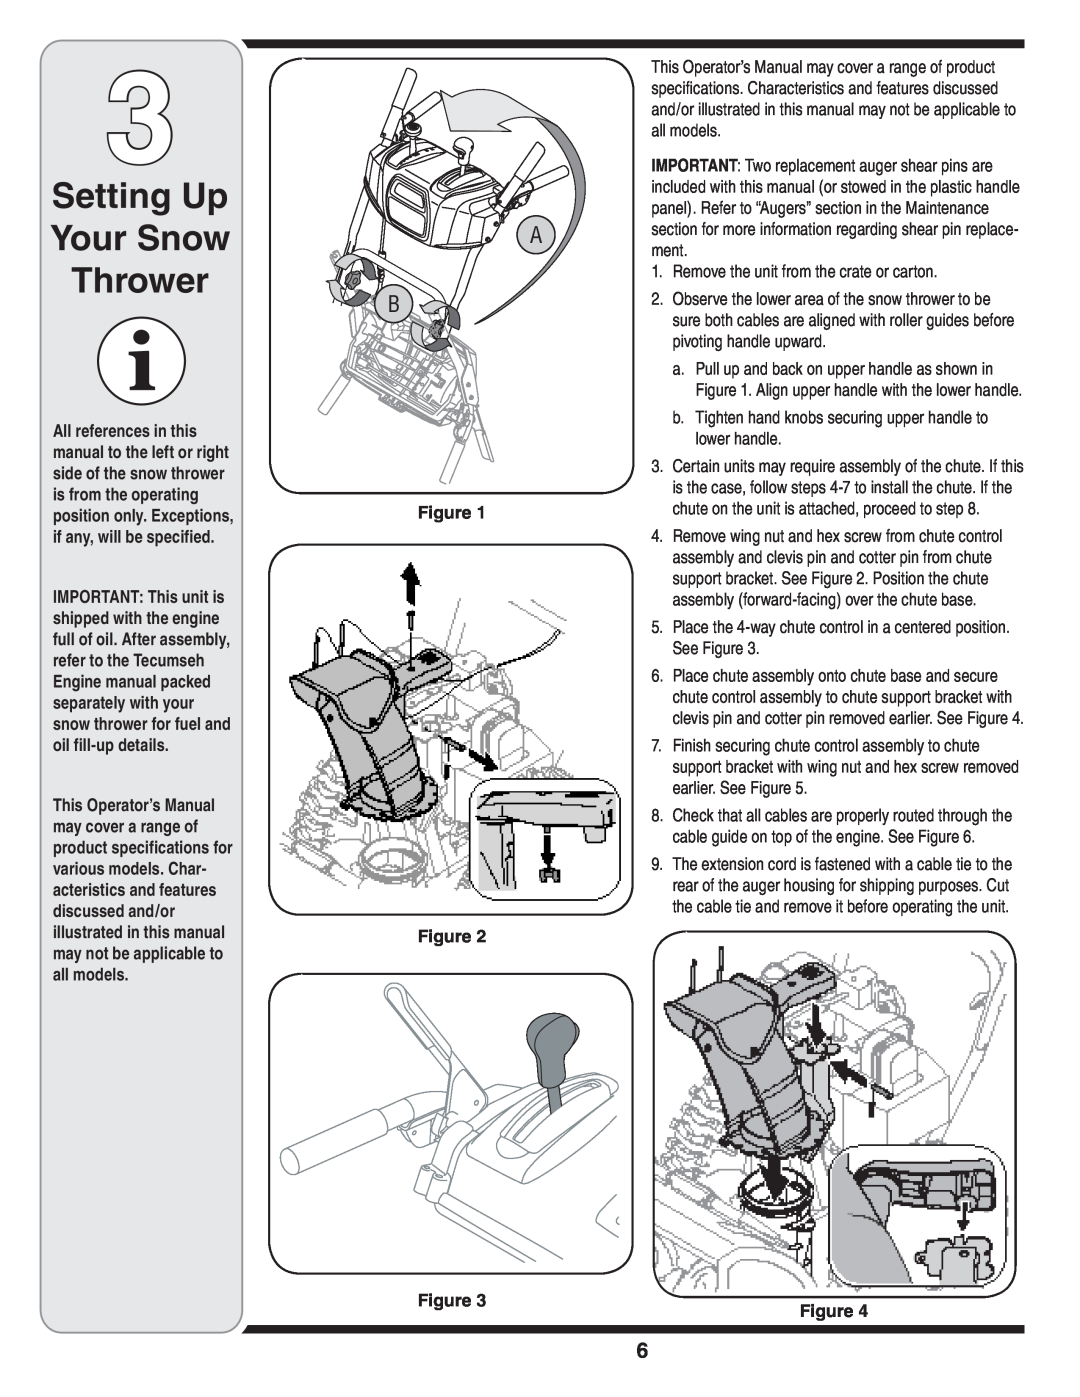 Cub Cadet WE 26 warranty Setting Up Your Snow Thrower, Figure Figure Figure 